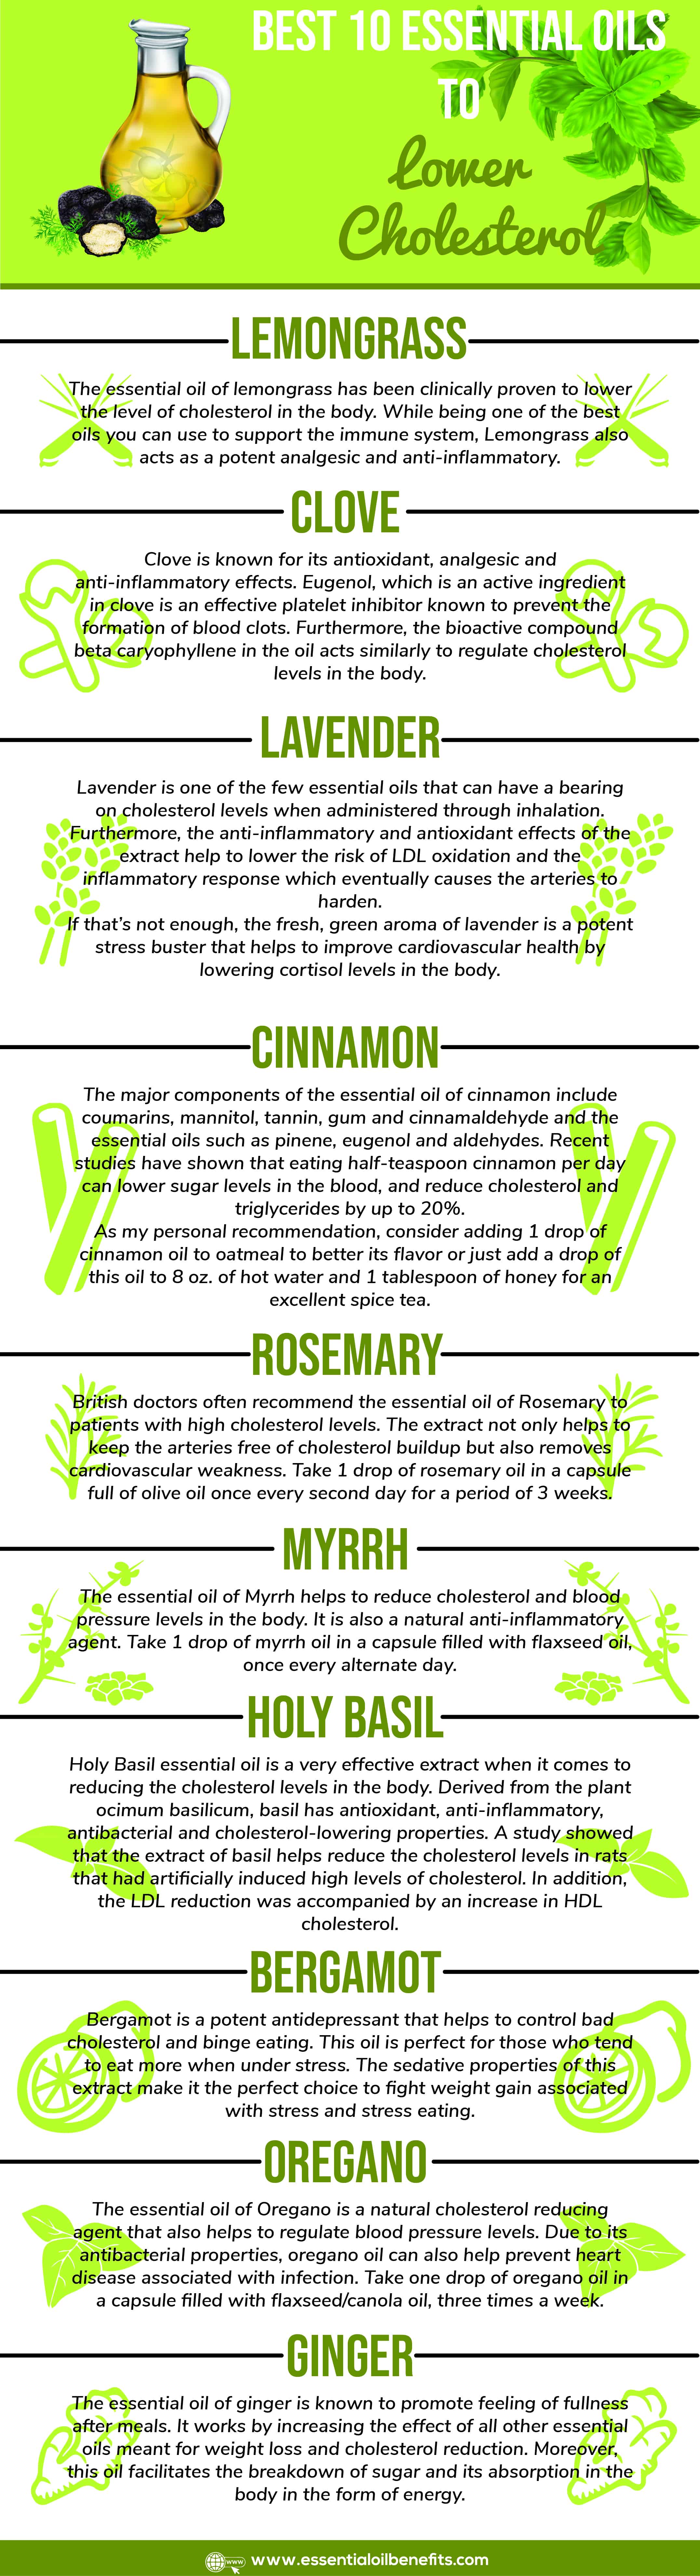 Best Foods And Essential Oils To Lower Cholesterol Naturally Essential Oil Benefits